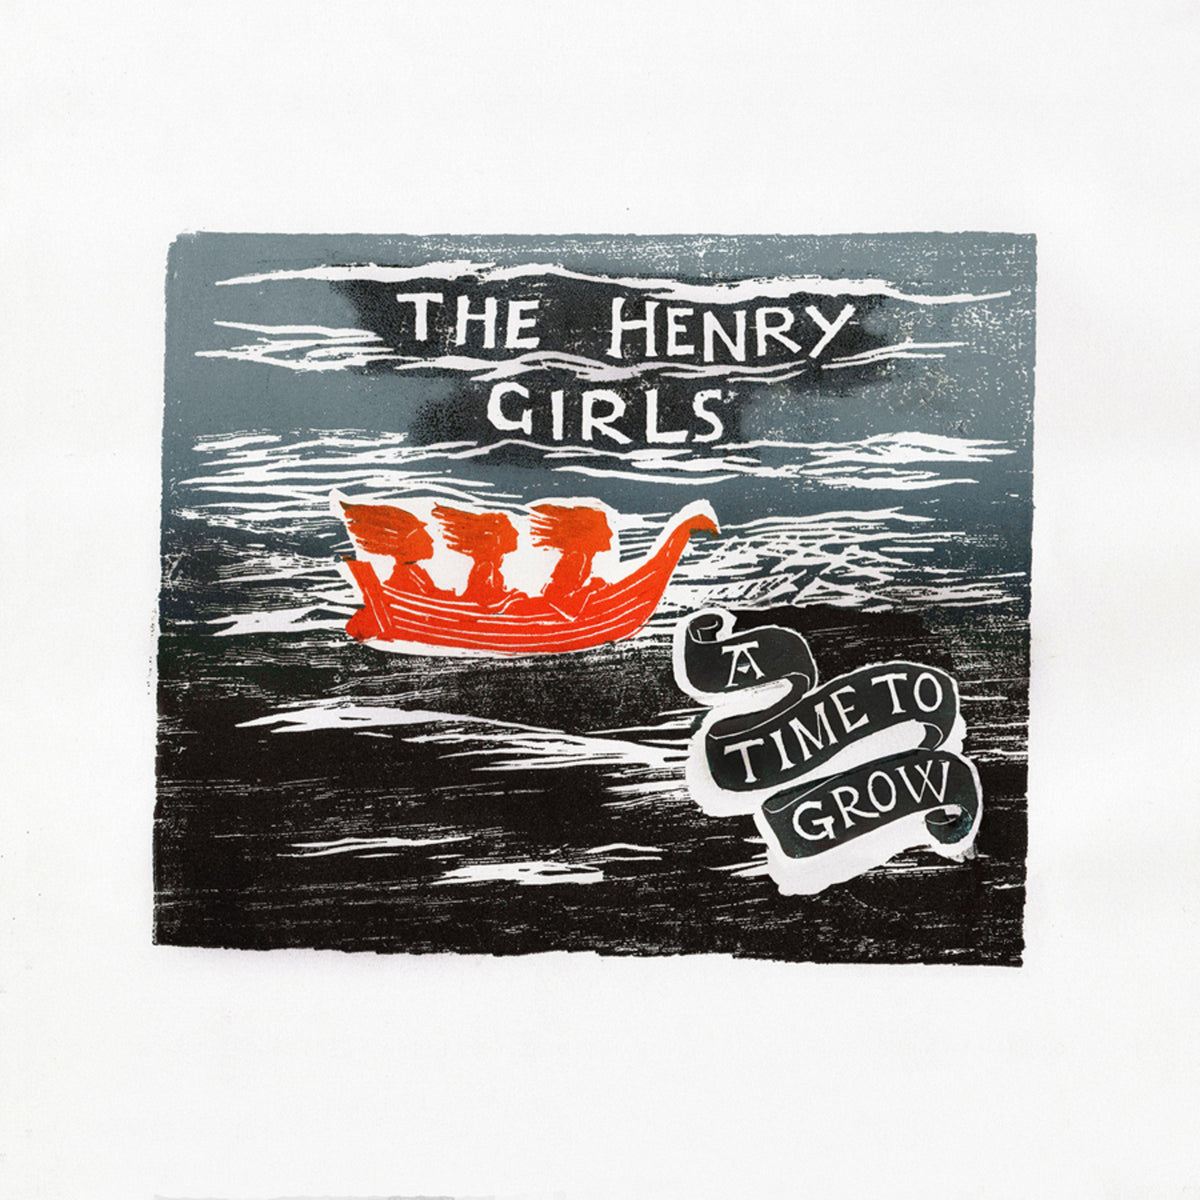 The Henry Girls - A Time To Grow - CPL069